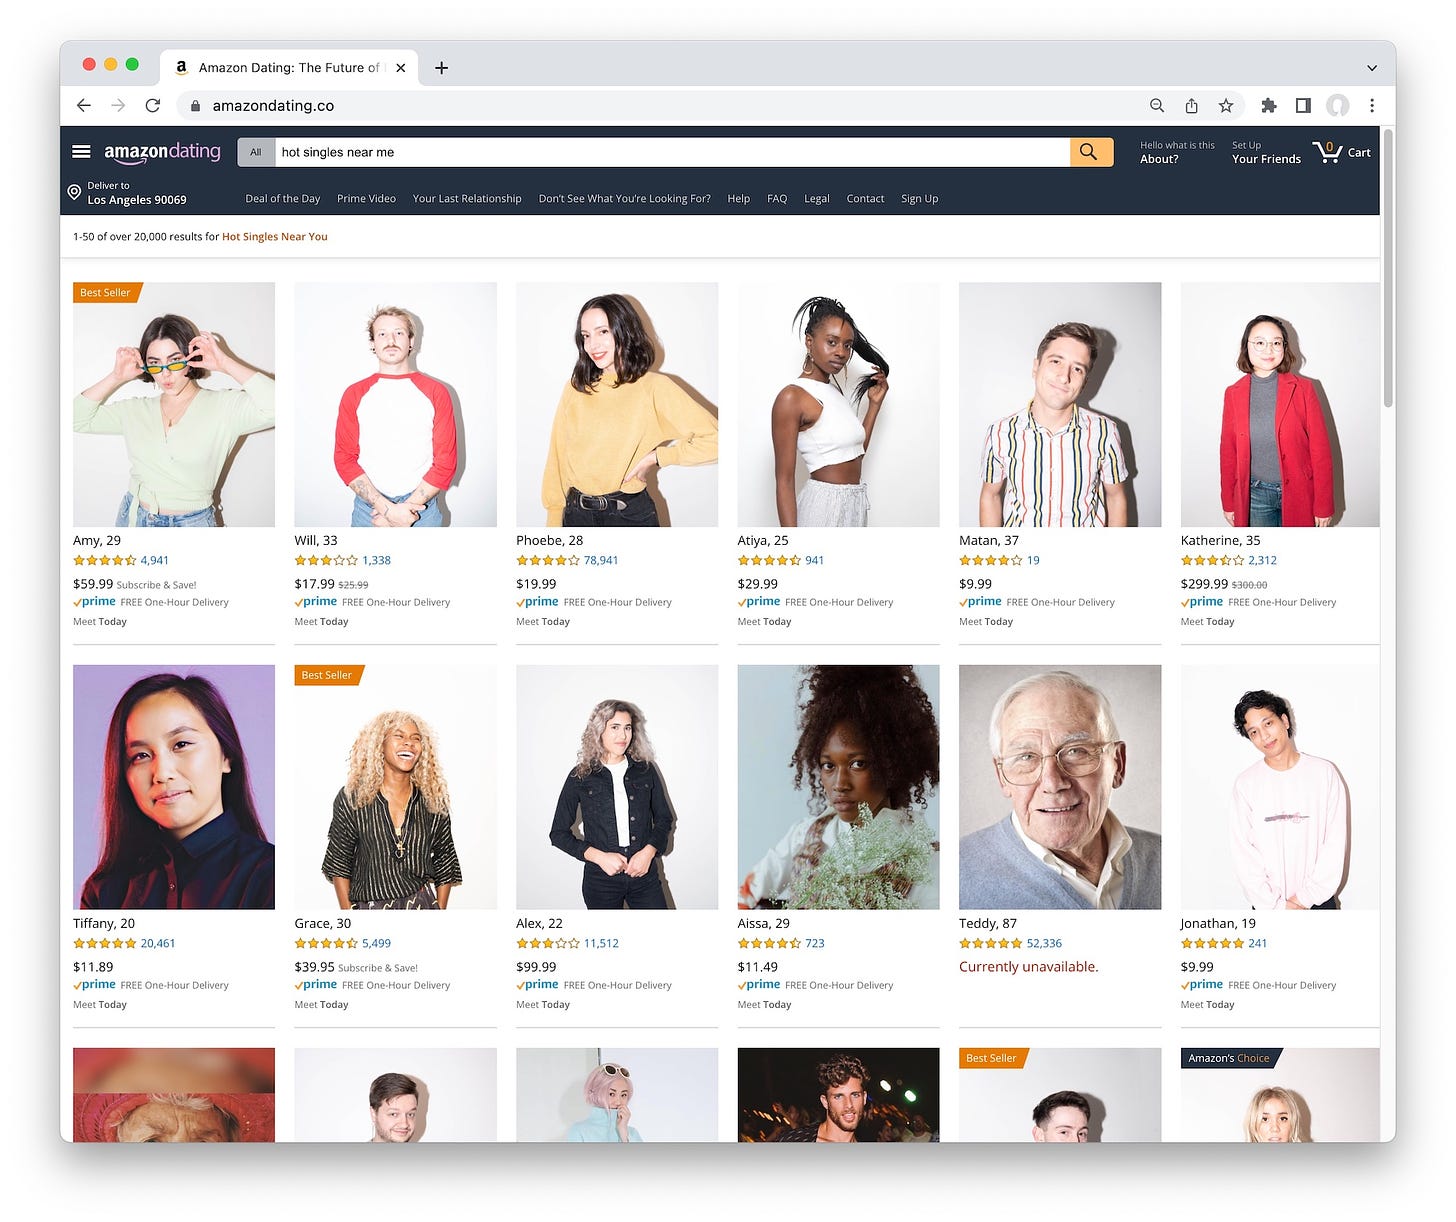 Screenshot of “Amazon Dating”, a satirical website where you browse for dates as if you were shopping on Amazon